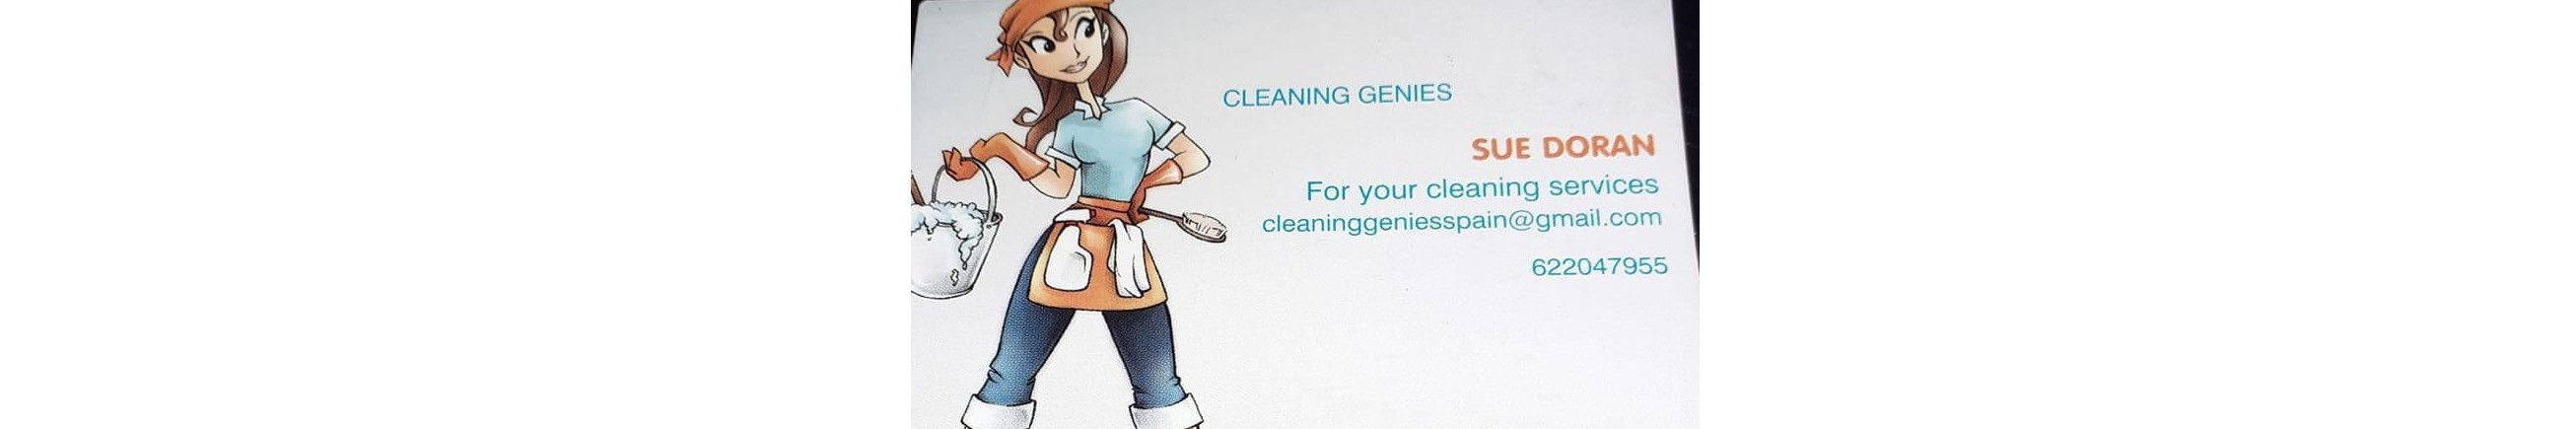 Cleaning Genies for all your cleaning requirements